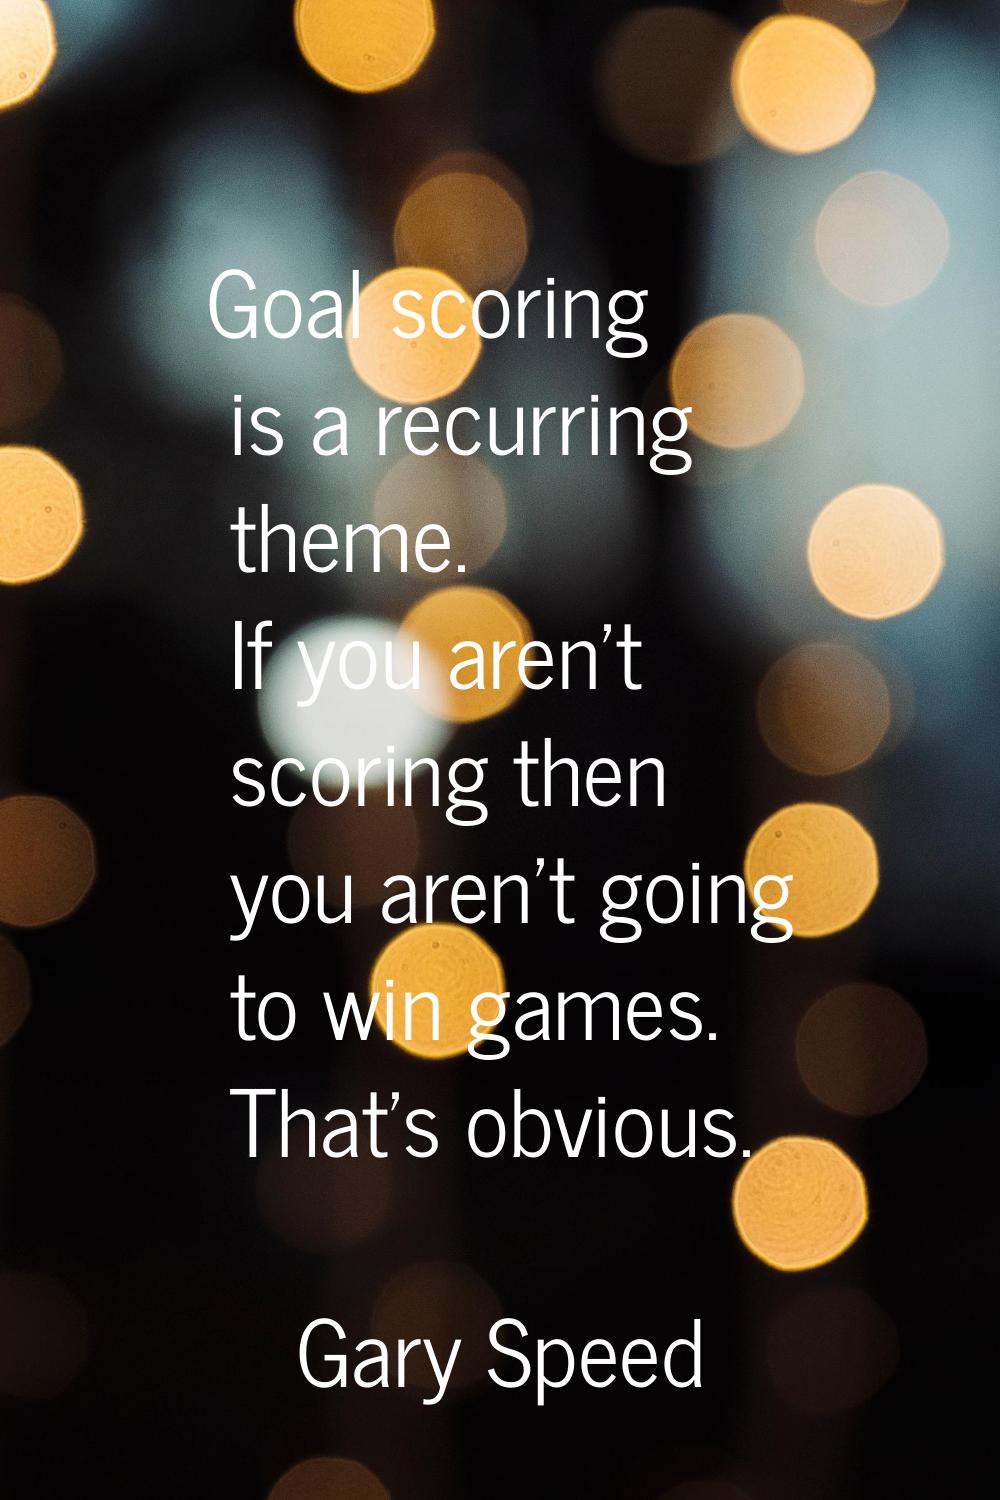 Goal scoring is a recurring theme. If you aren't scoring then you aren't going to win games. That's